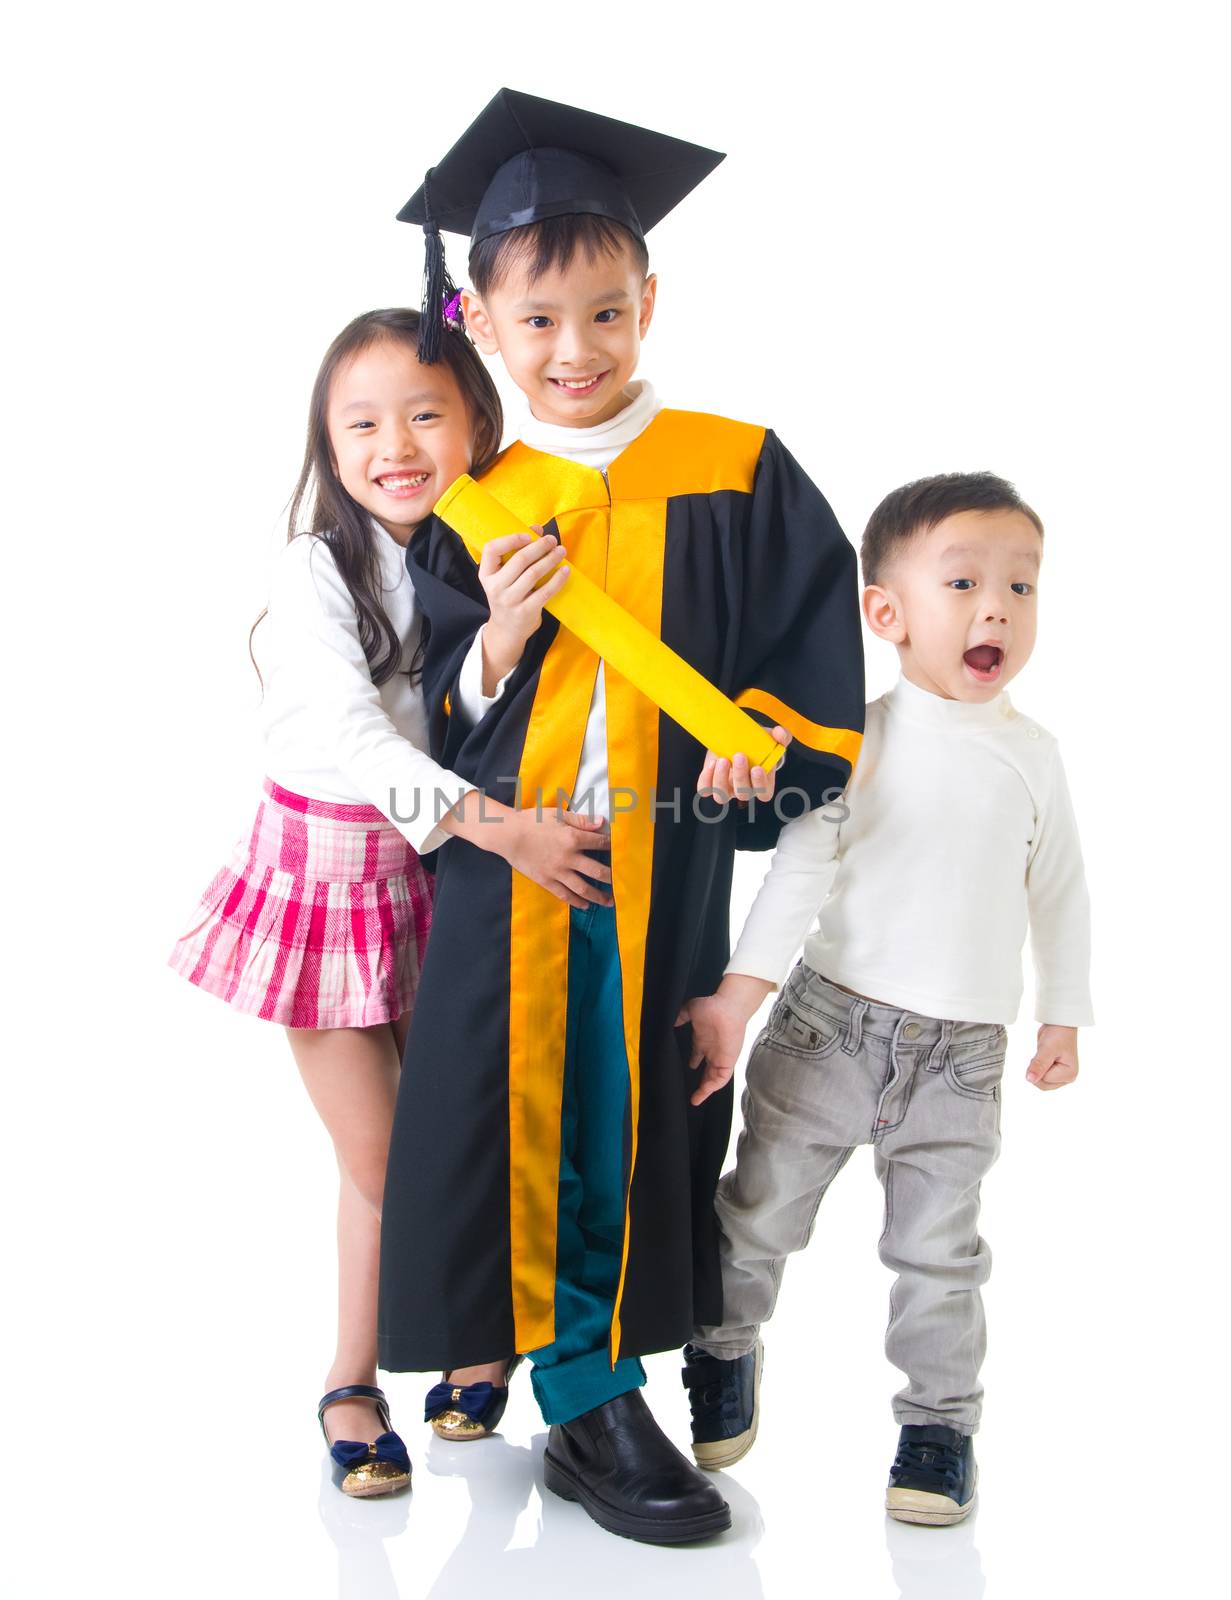 Asian school kid graduate in graduation gown and cap. Taking photo with sister and brother.